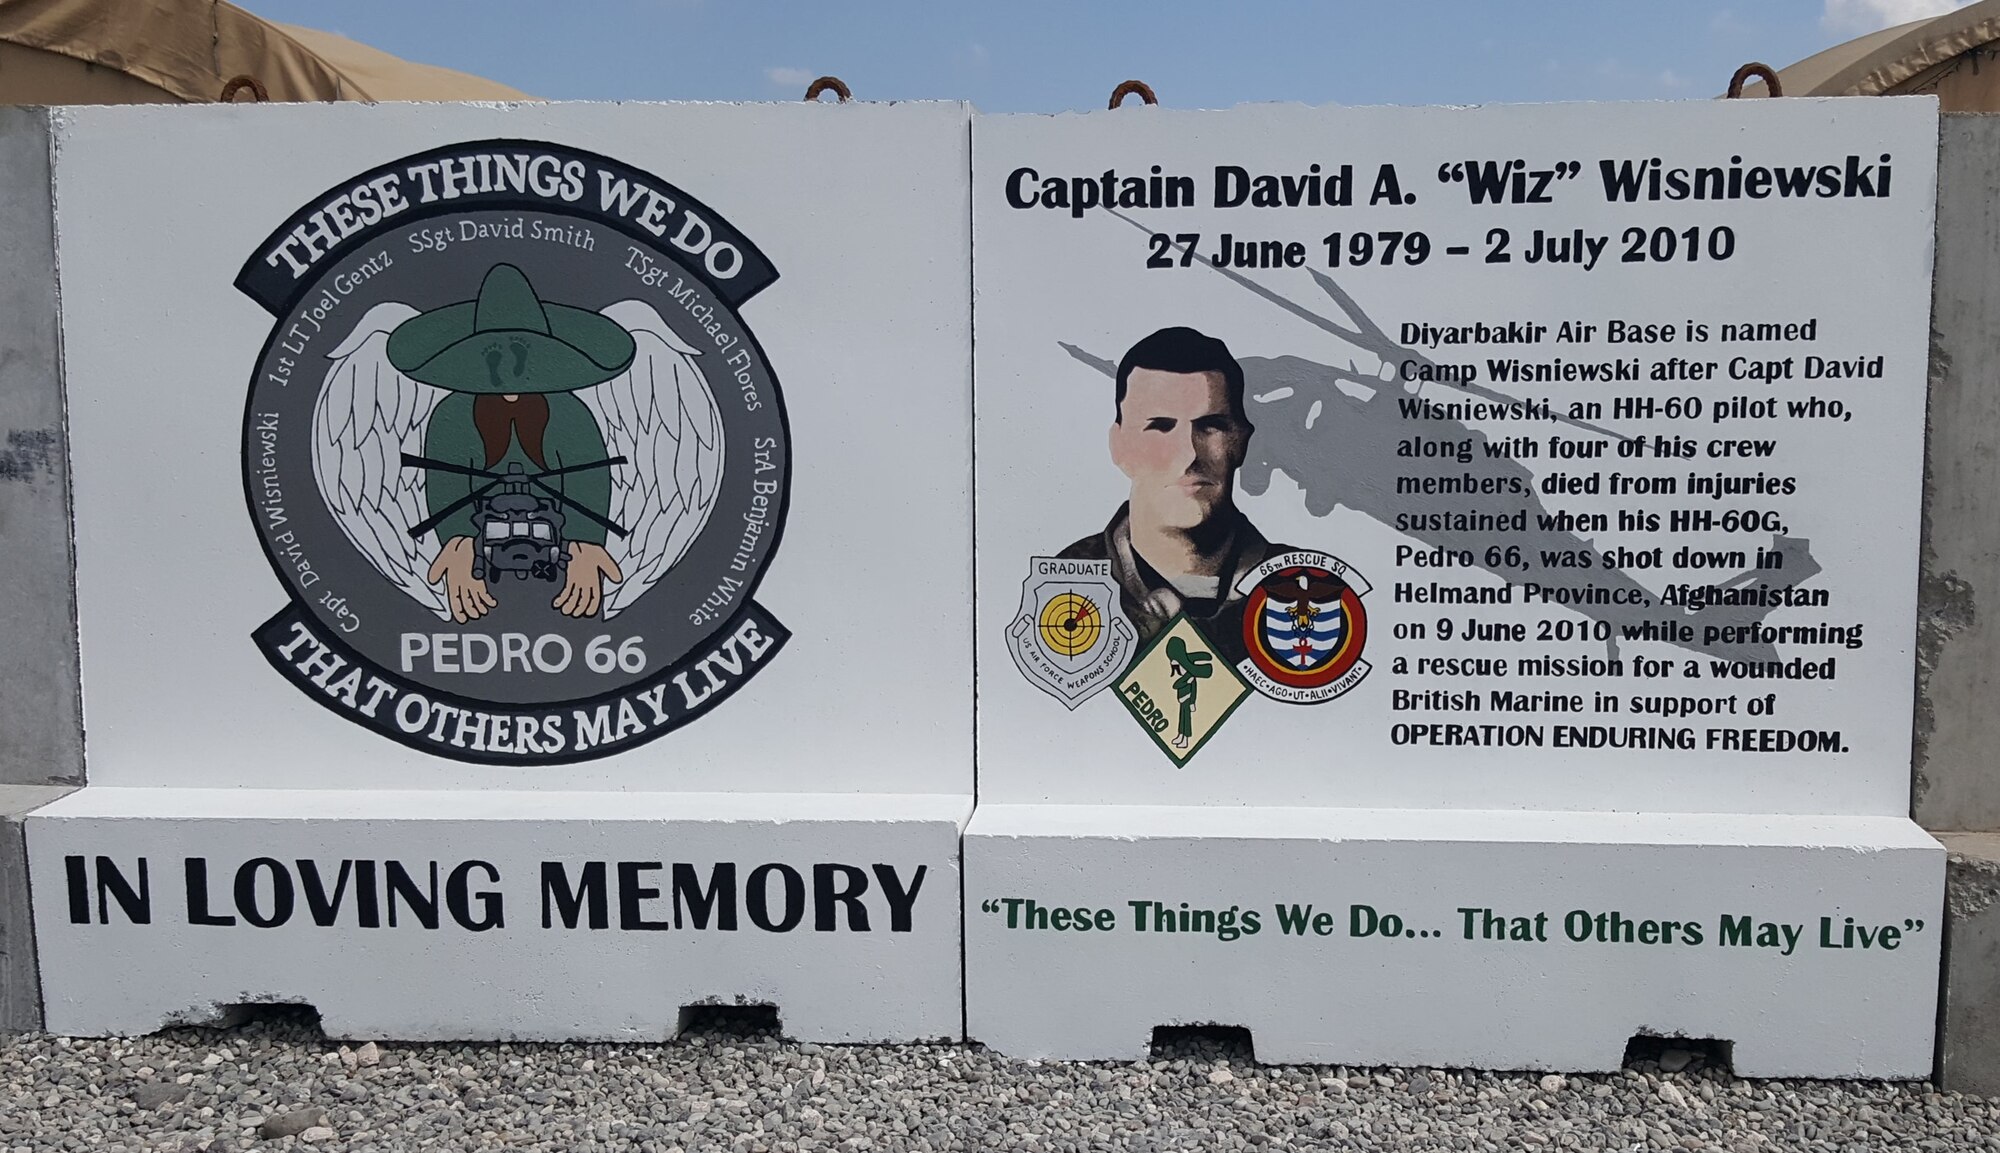 A memorial wall in honor of Capt. David A. “Wiz” Wisniewski is set outside the chapel, March 28, 2017, at Diyarbakir Air Base, Turkey. Wisniewski, an HH-60 Pave Hawk pilot, along with his crew, were killed in action while performing a rescue mission for a wounded British Marine in support of Operation Enduring Freedom. (Courtesy photo)